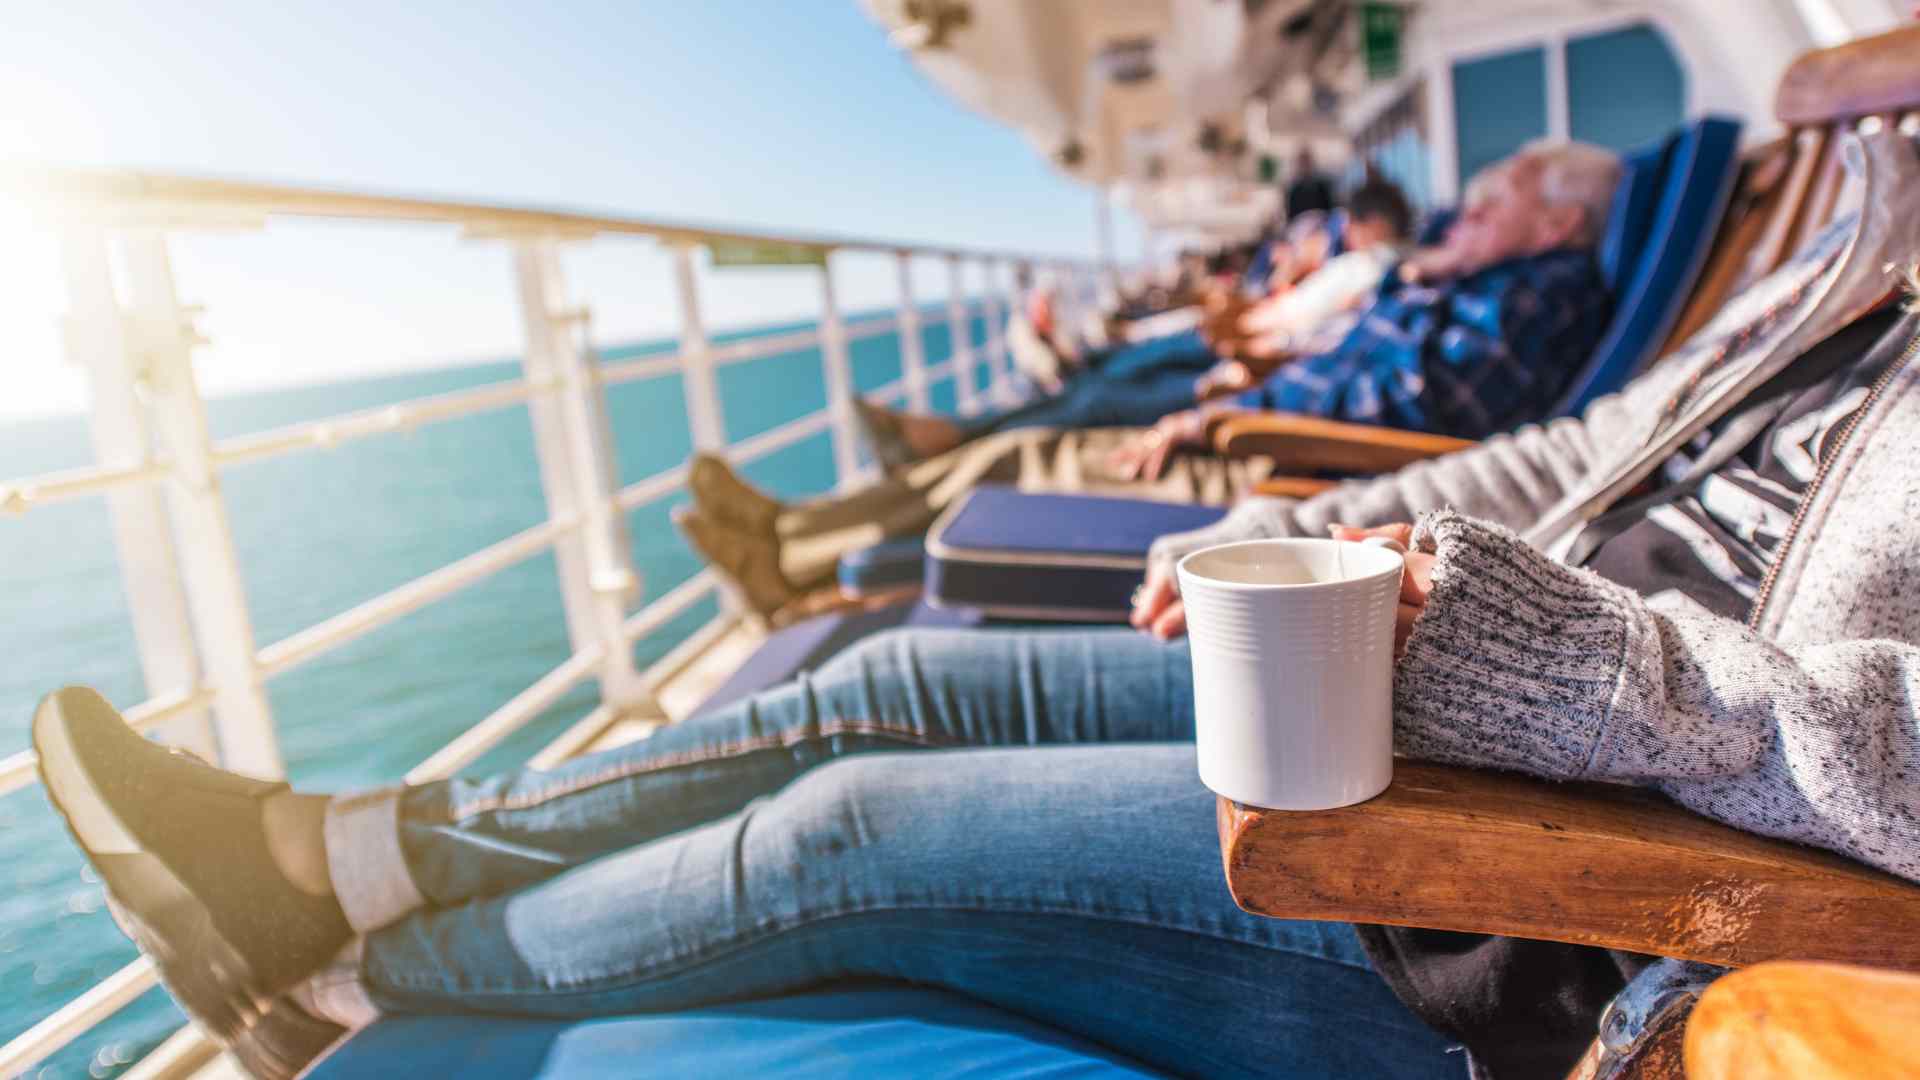 Making the Most of Your December Cruise